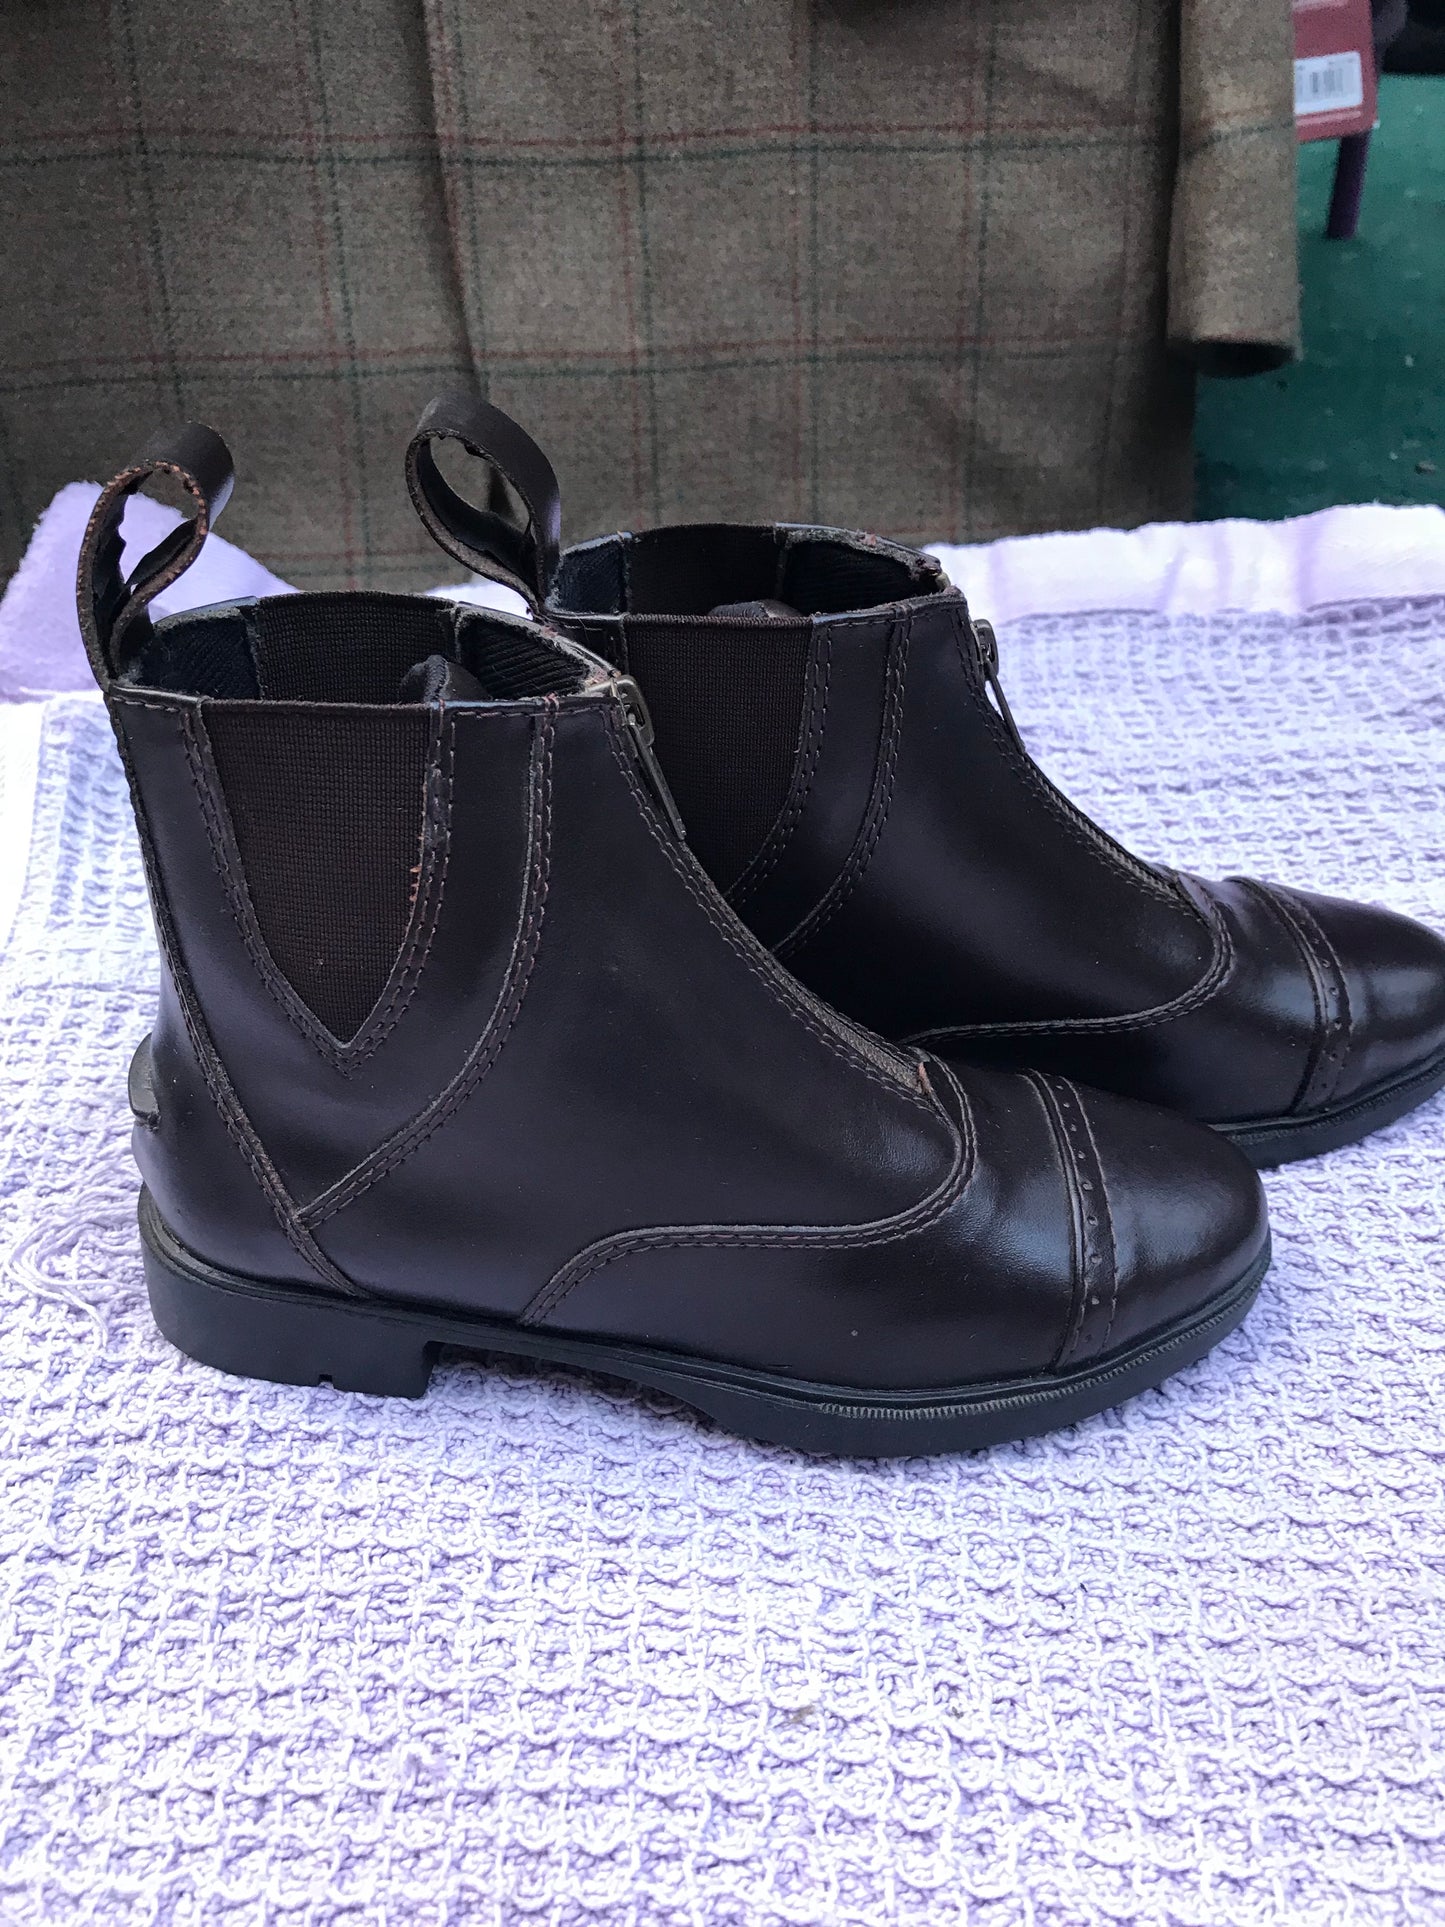 NEW Shires jodhpur boots size child’s 13 FREE POSTAGE *